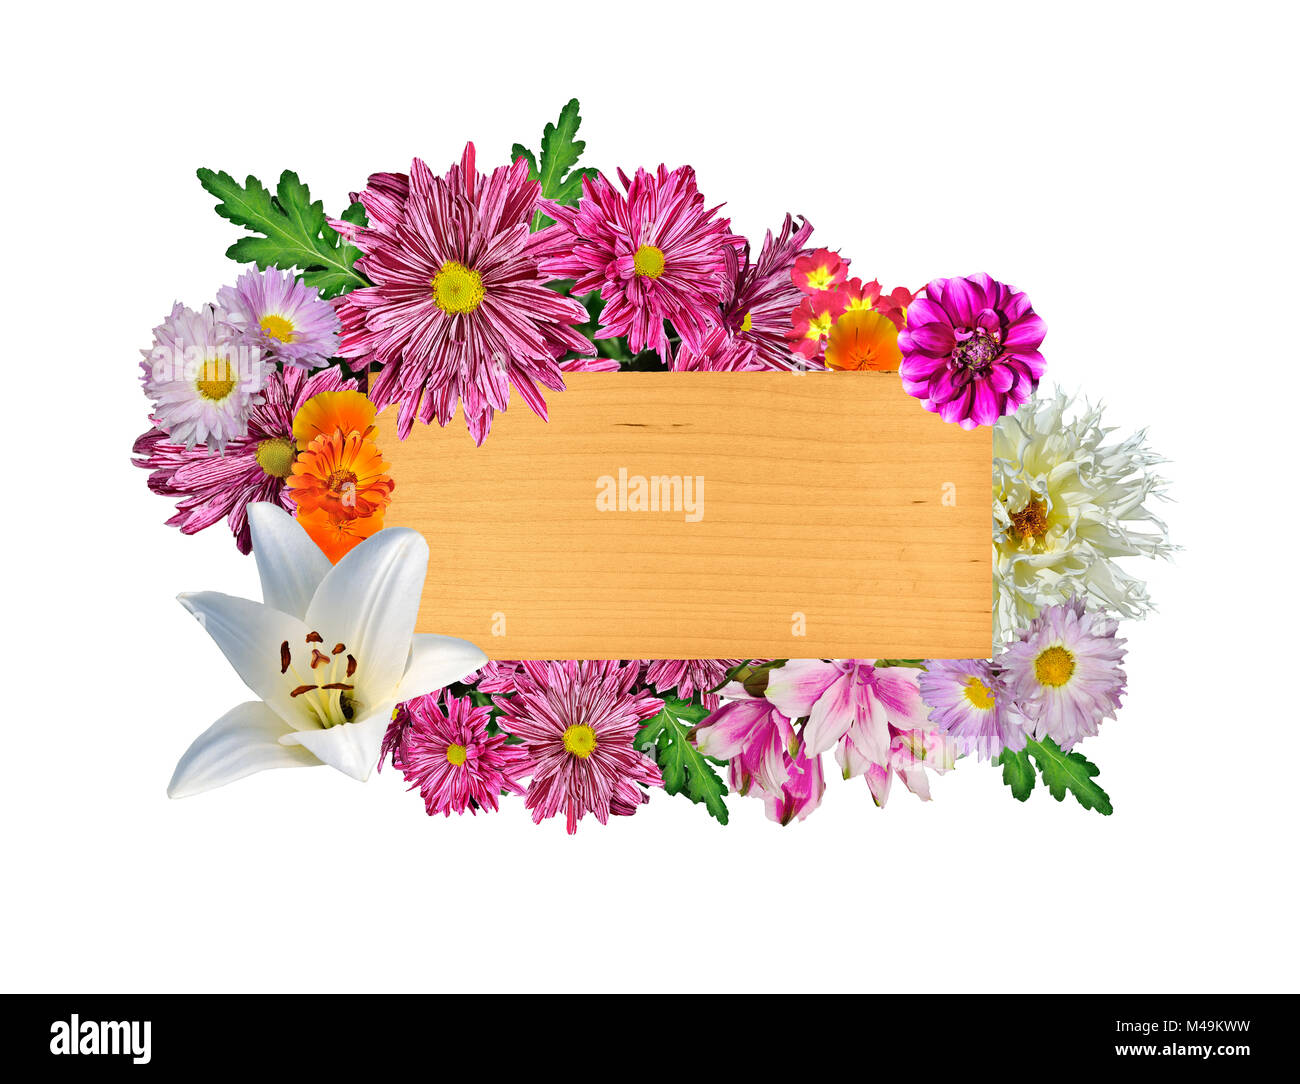 Beautiful bright floral frame around a wooden signboard Stock Photo